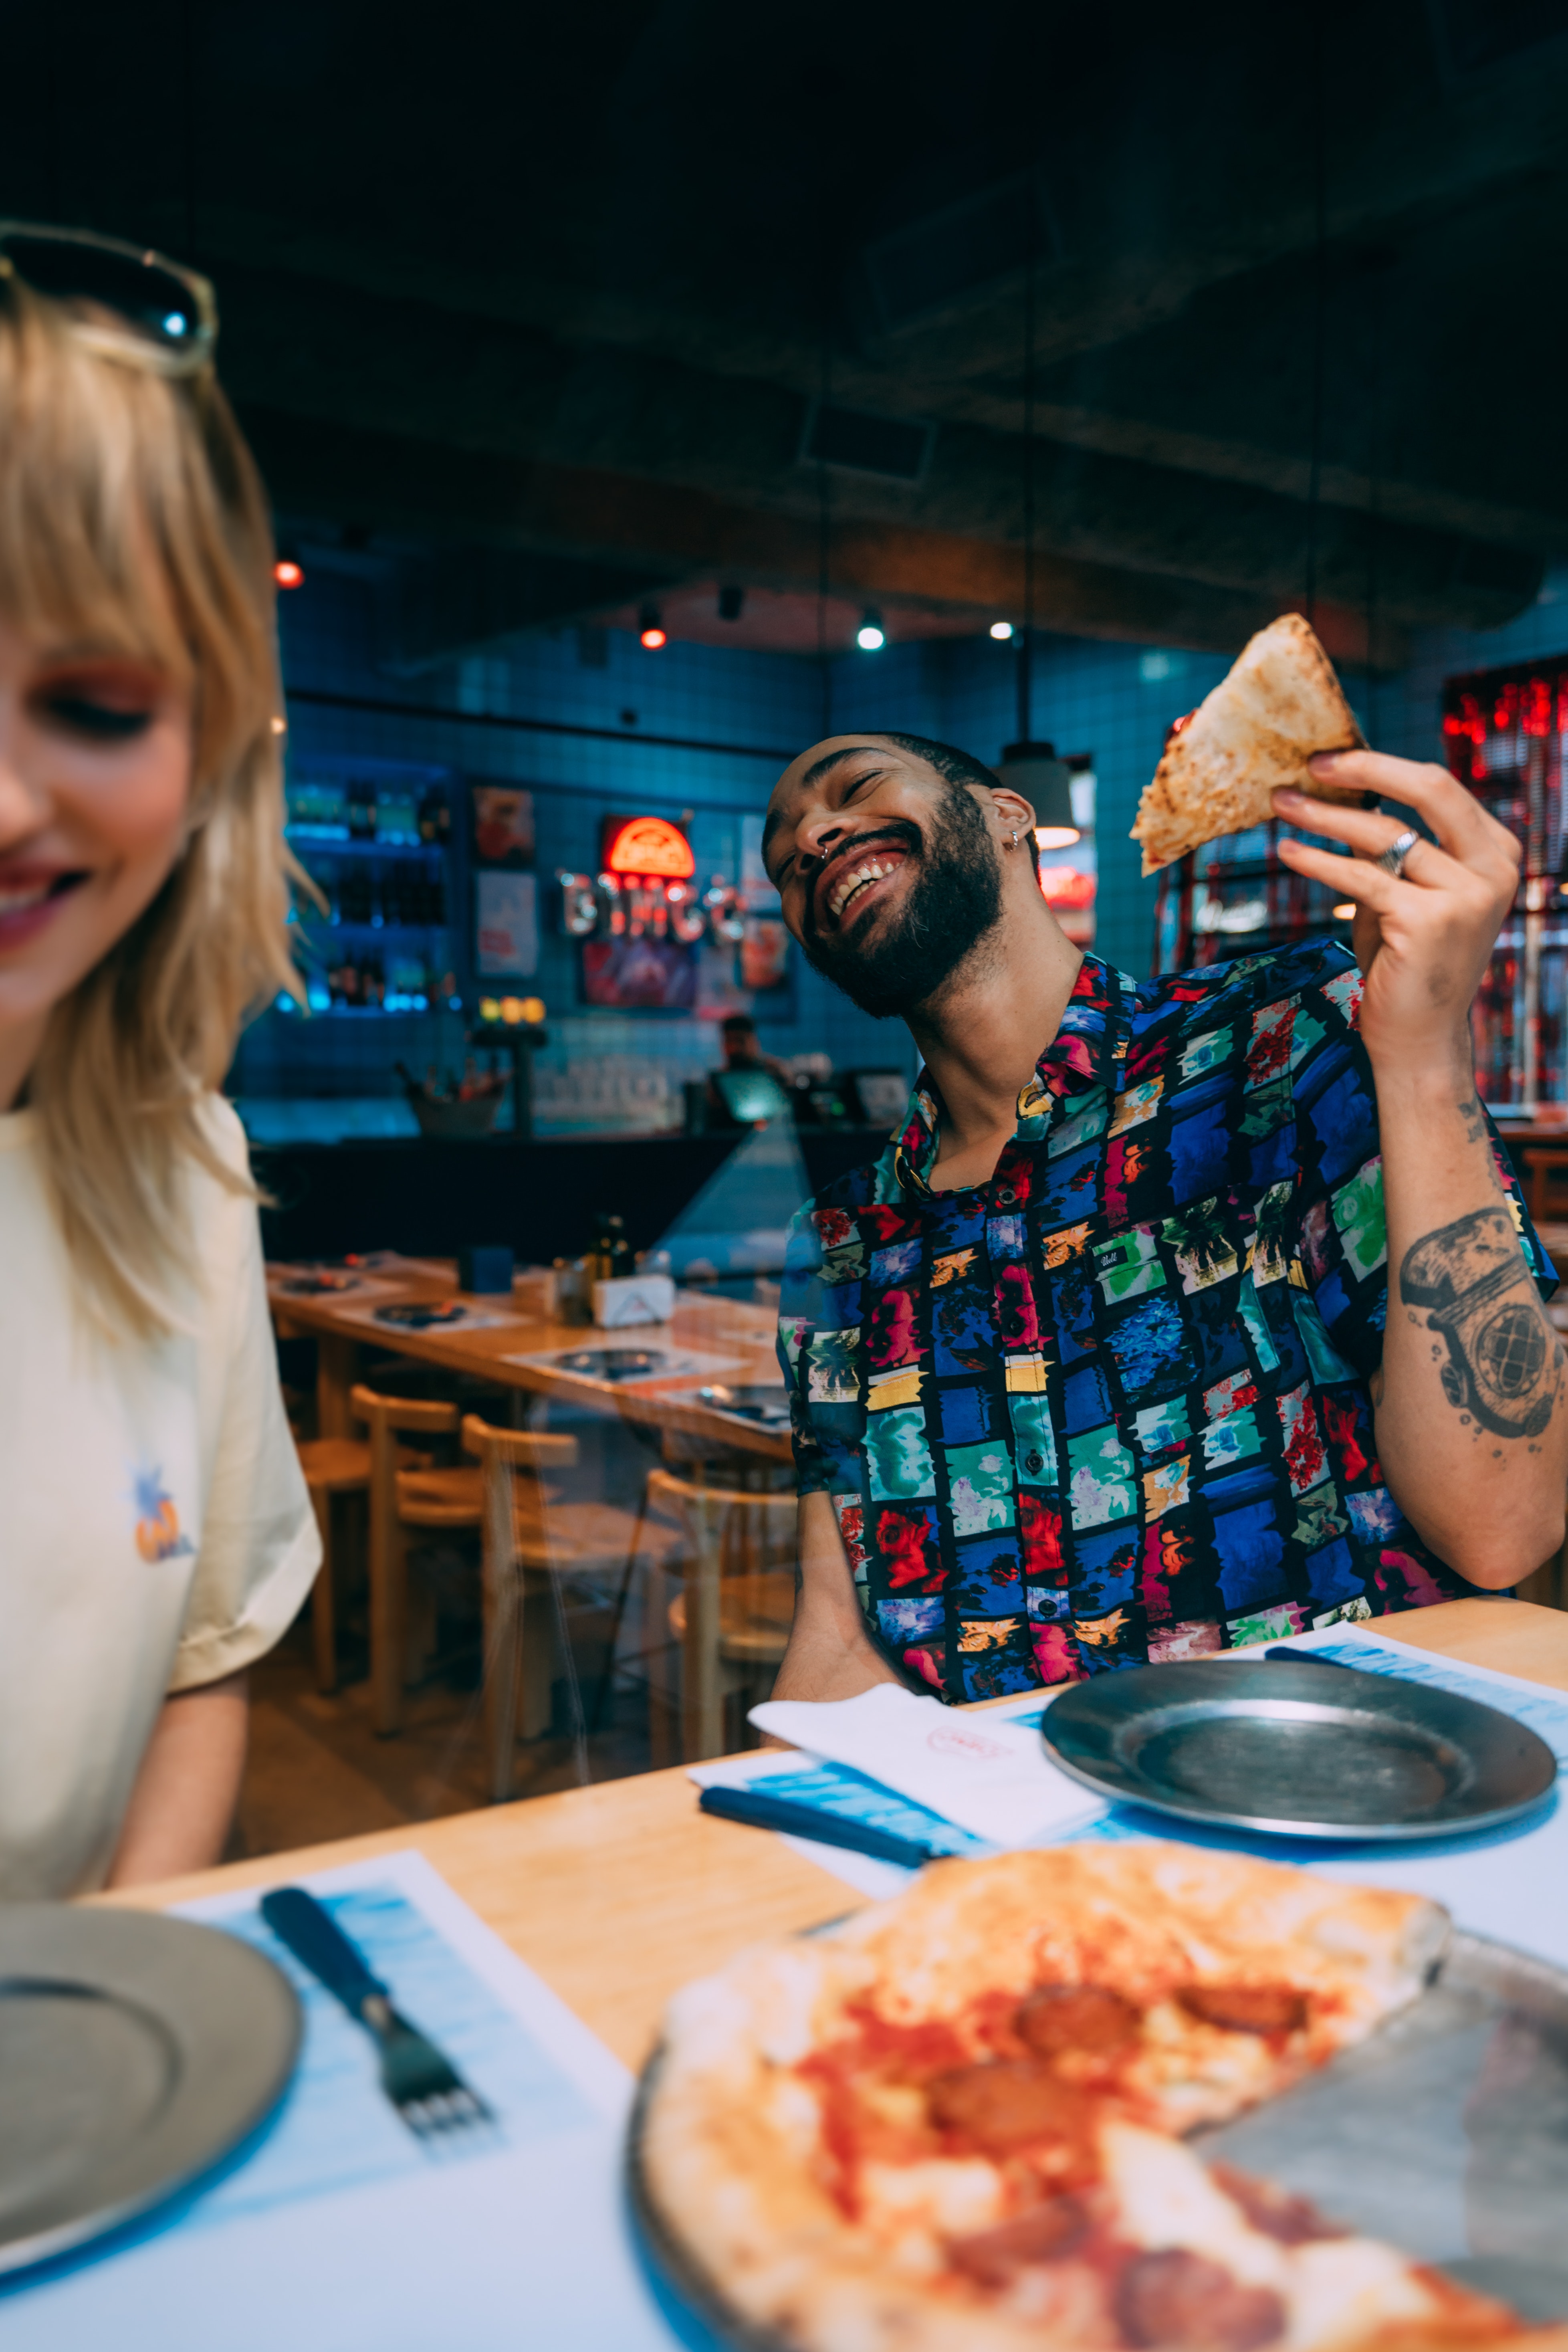 A couple laughing and eating pizza at a bar.  | Source: Pexels